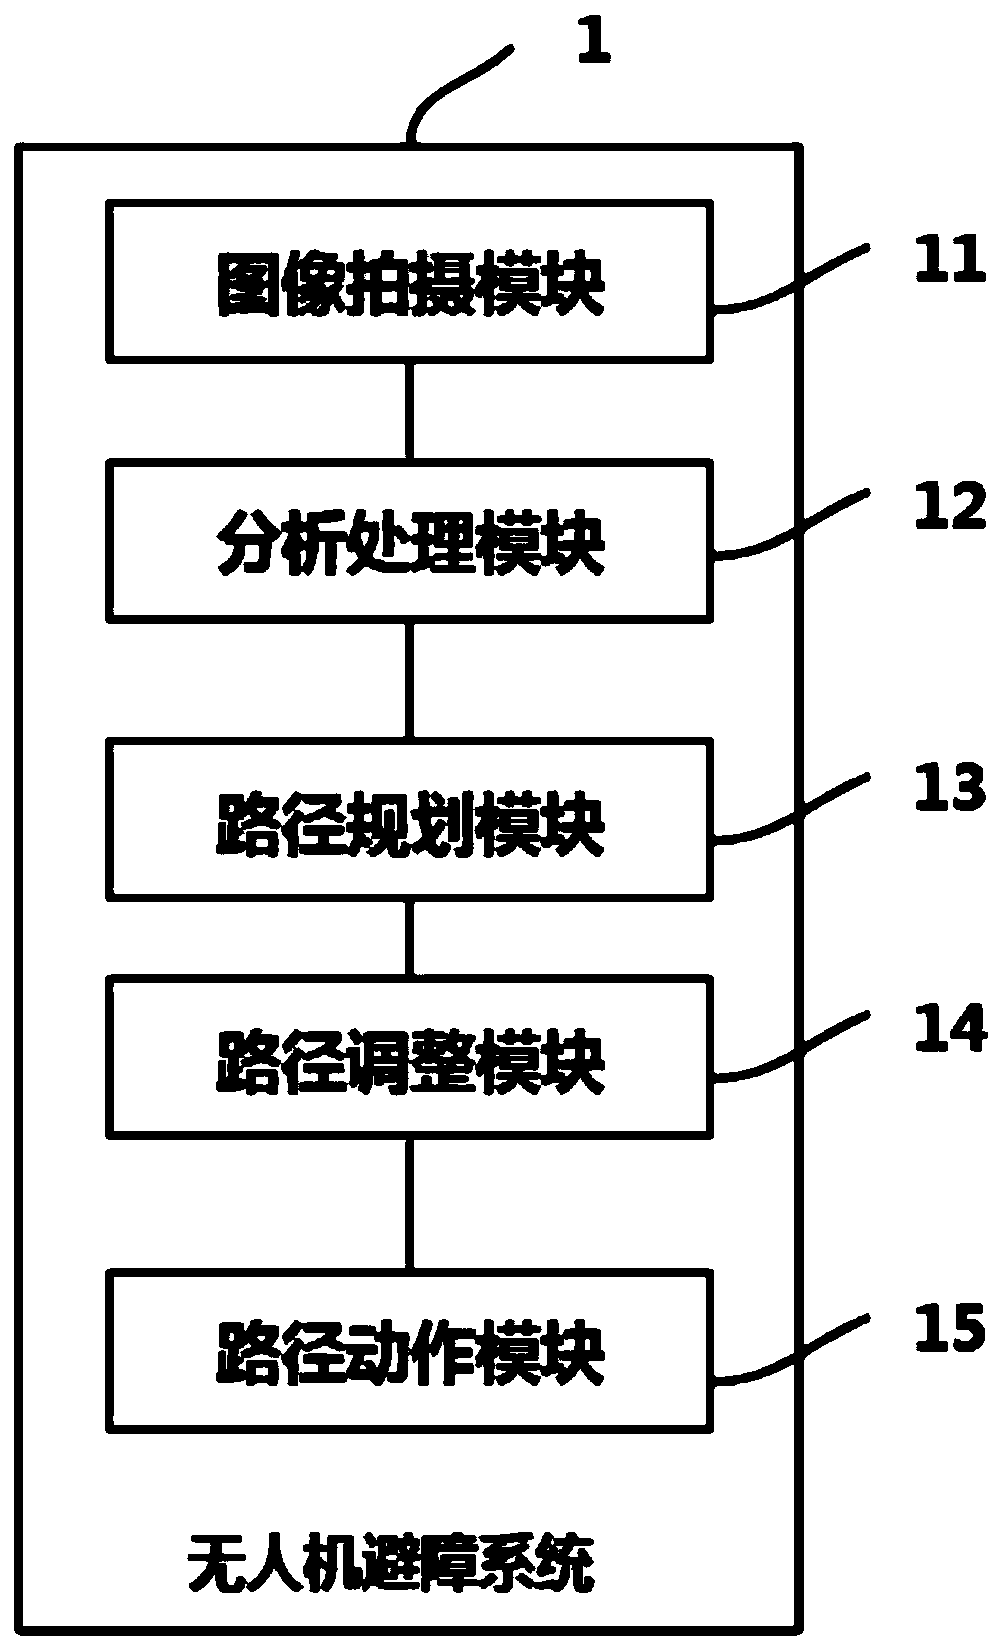 Obstacle avoidance method and system for unmanned aerial vehicle